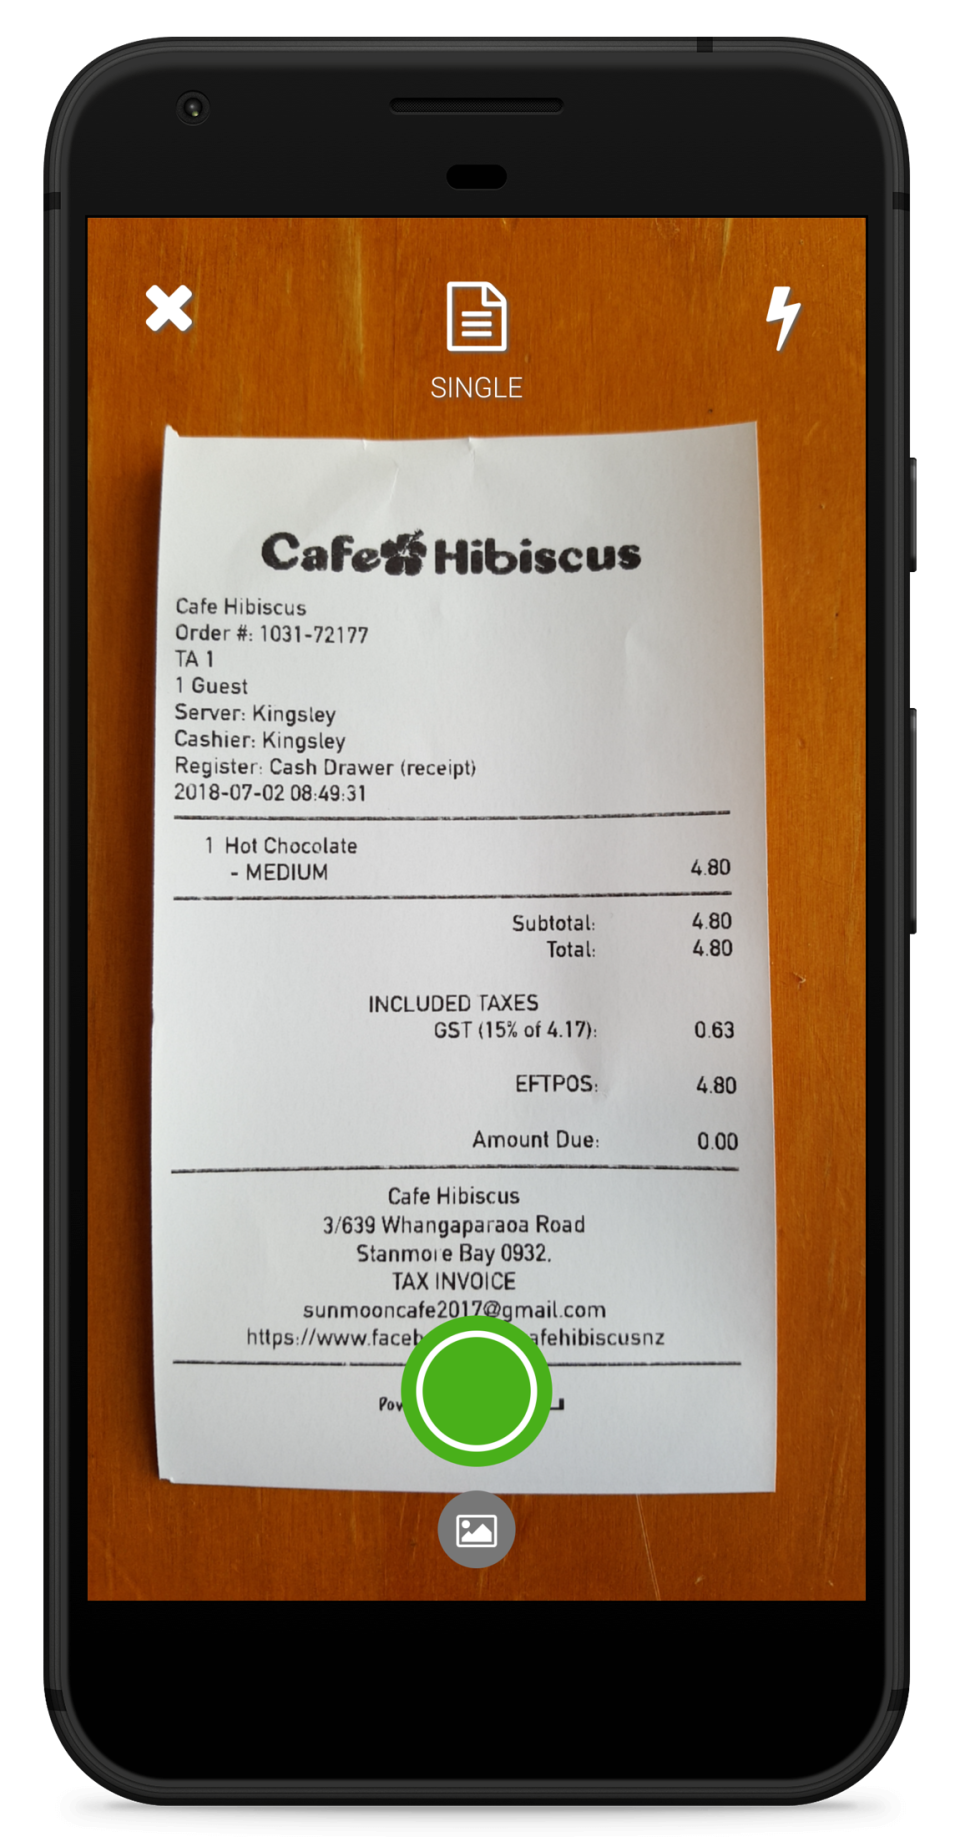 Receipt Stash Software - Users can upload receipt images from their mobile device